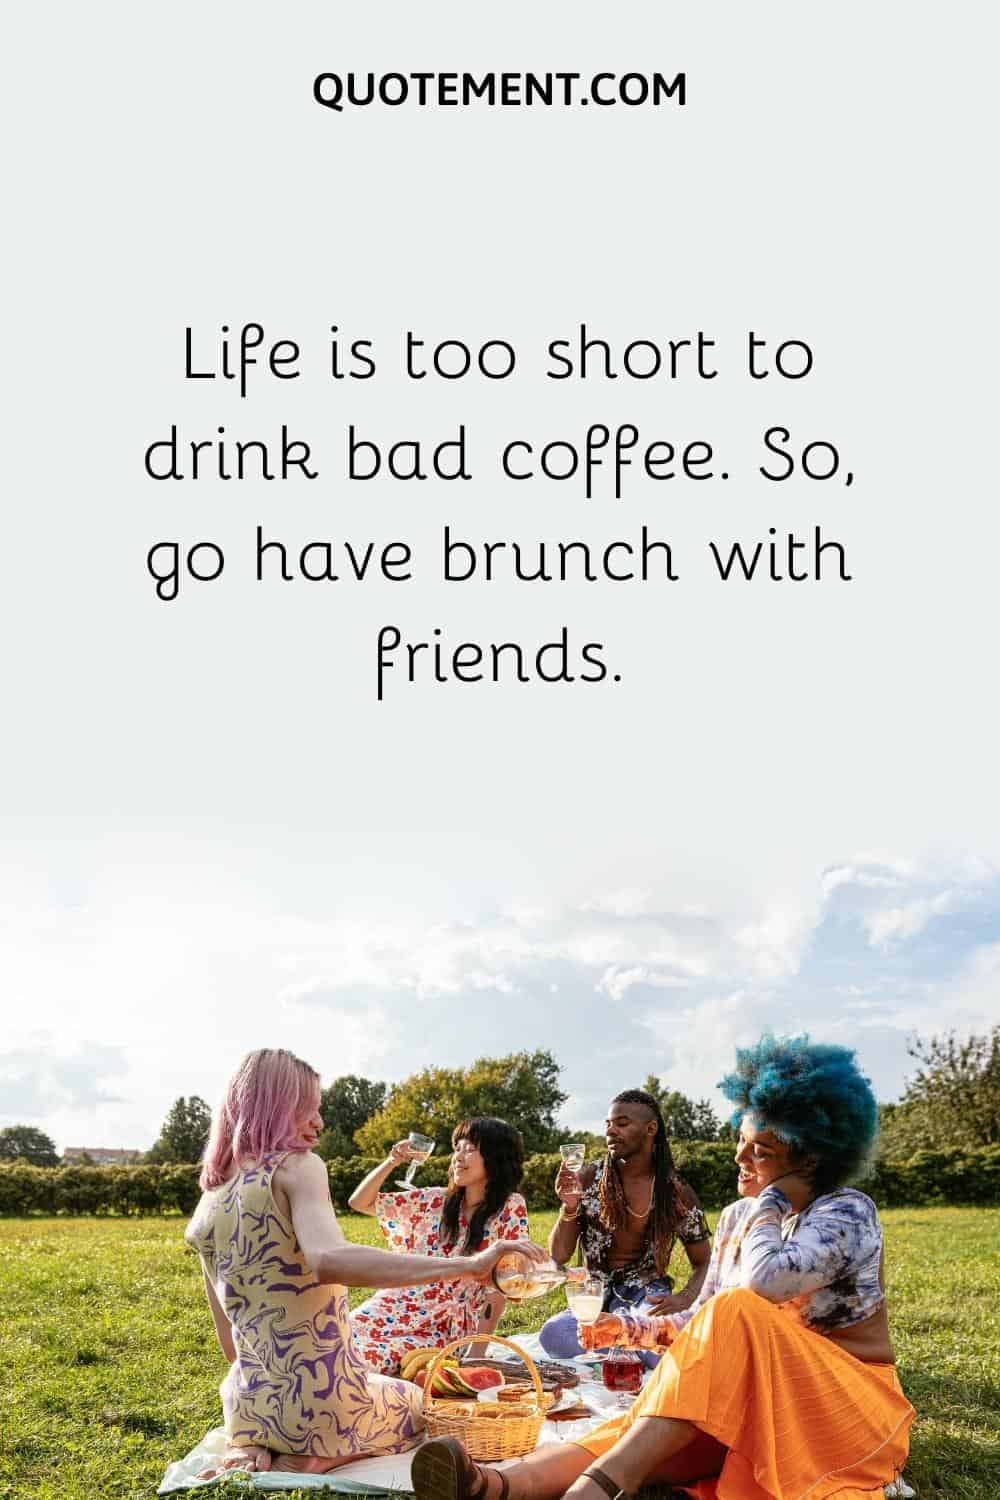 Life is too short to drink bad coffee. So, go have brunch with friends.